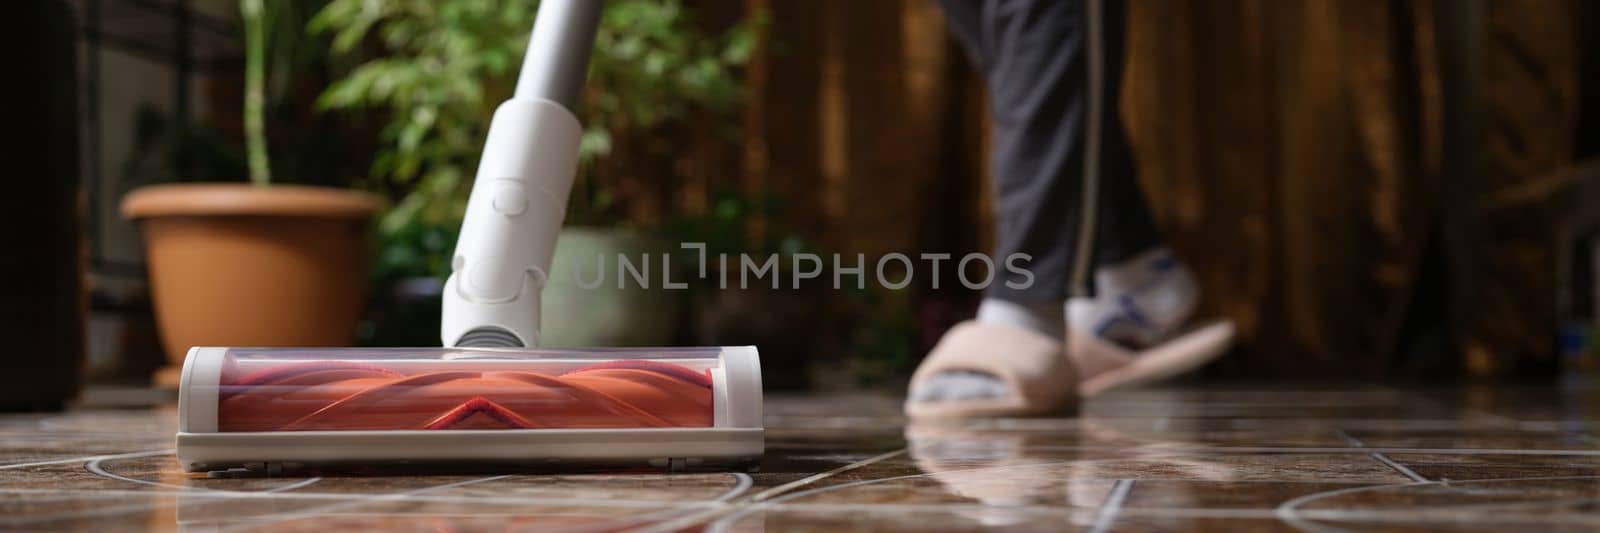 Cordless vacuum cleaner with turbo brush cleans tiles in living room by kuprevich